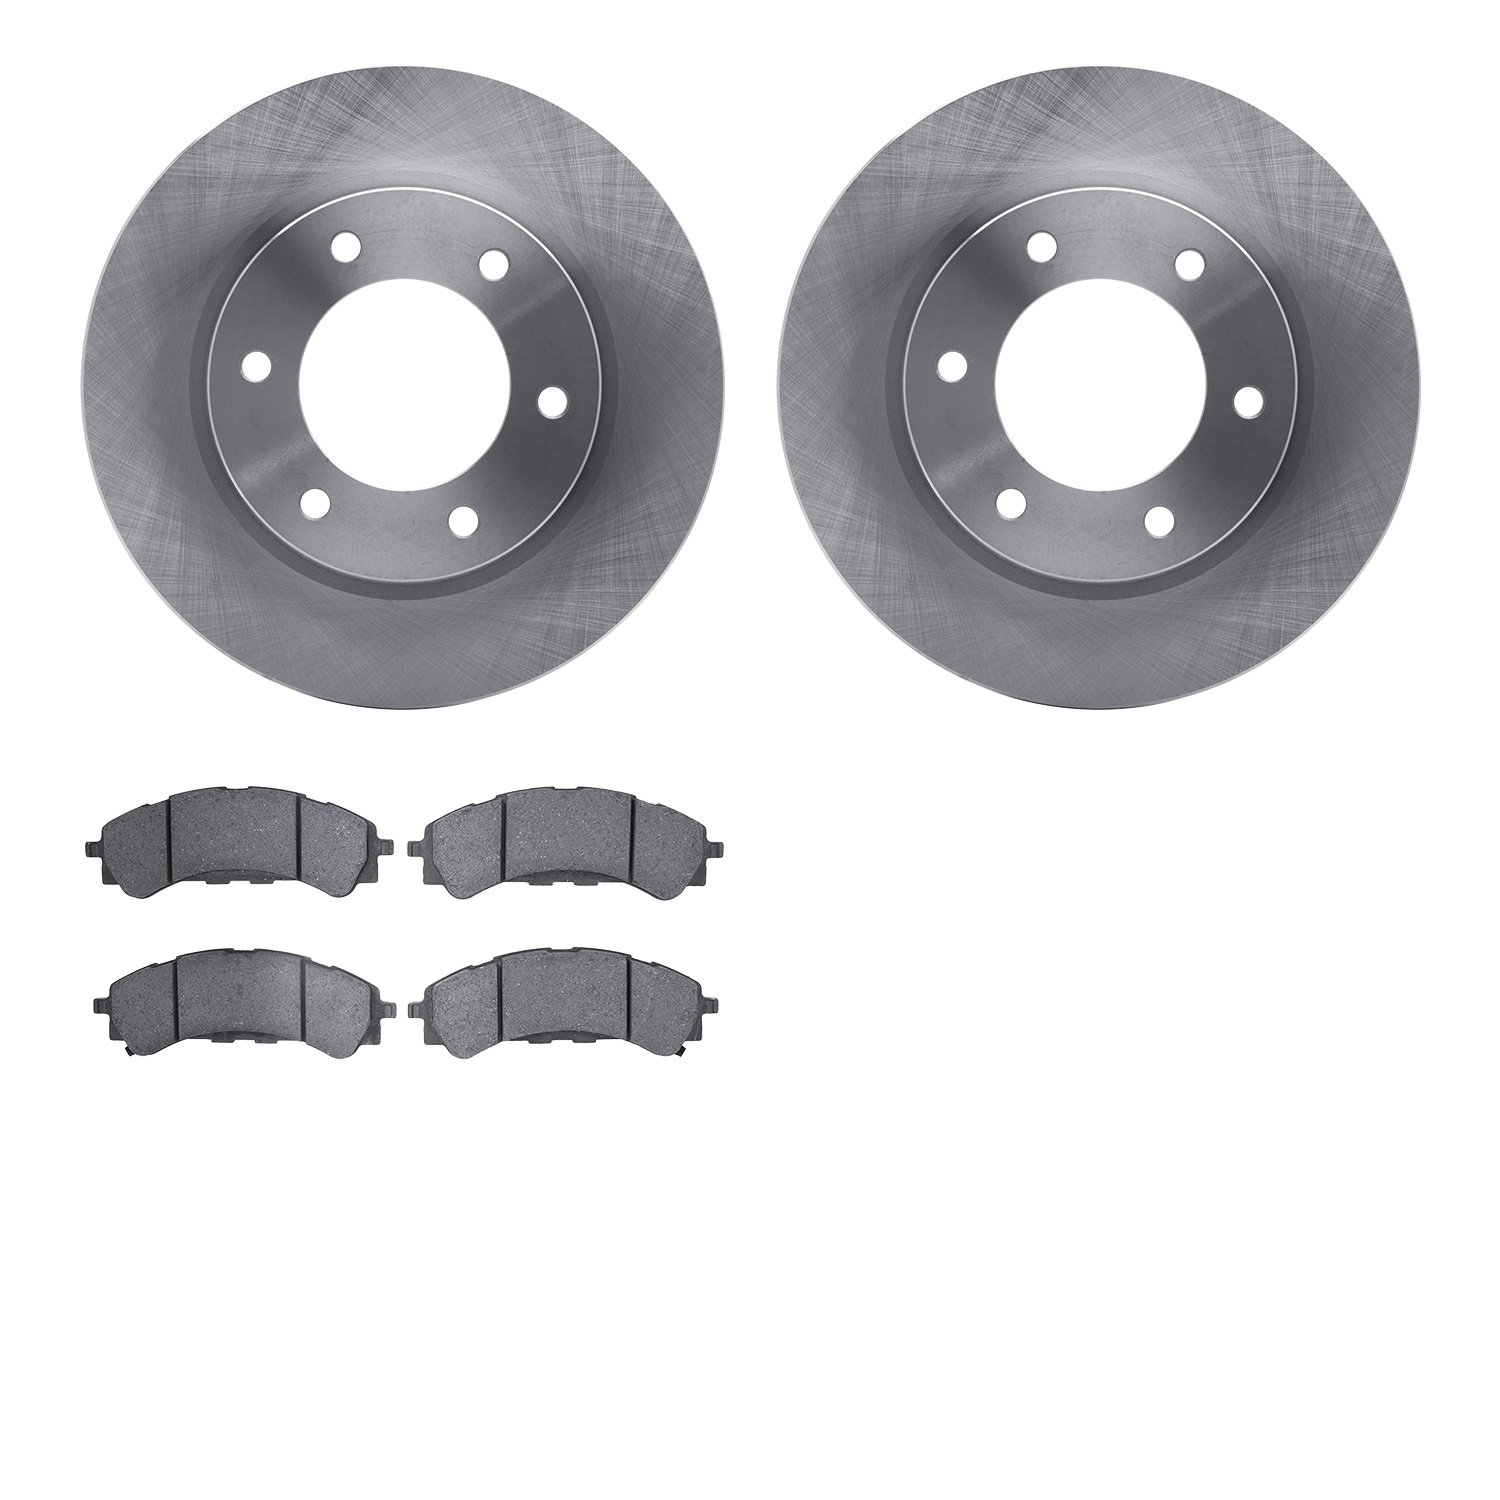 6502-99813 Brake Rotors w/5000 Advanced Brake Pads Kit, Fits Select Ford/Lincoln/Mercury/Mazda, Position: Front